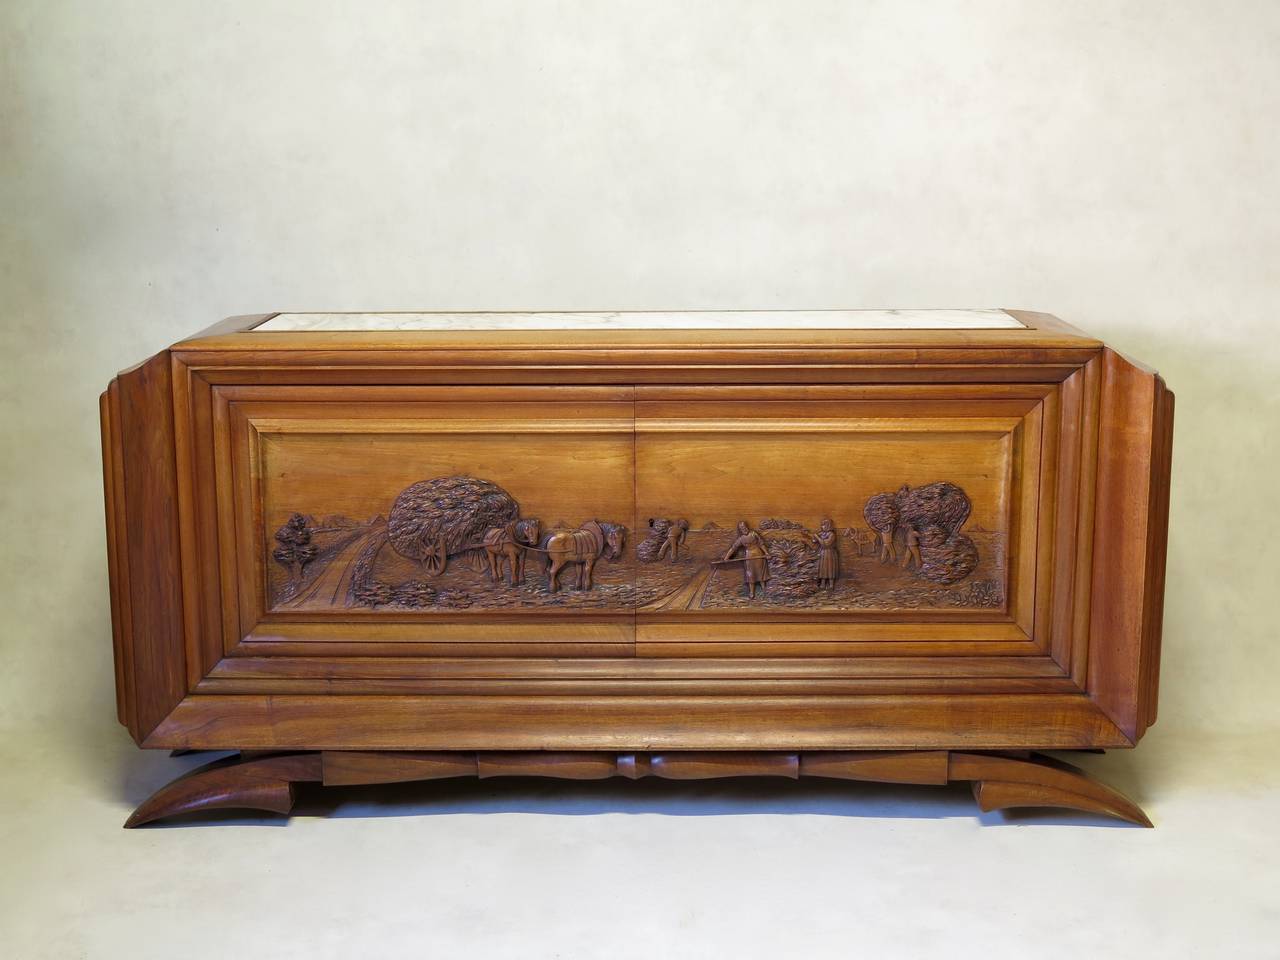 Spectacular and unusual large two-door sideboard. Mahogany and sculpted fruitwood doors. The base has a superb, very graphic line. The doors are elaborately carved in relief, representing an agricultural scene (wheat-harvesting in the fields). The